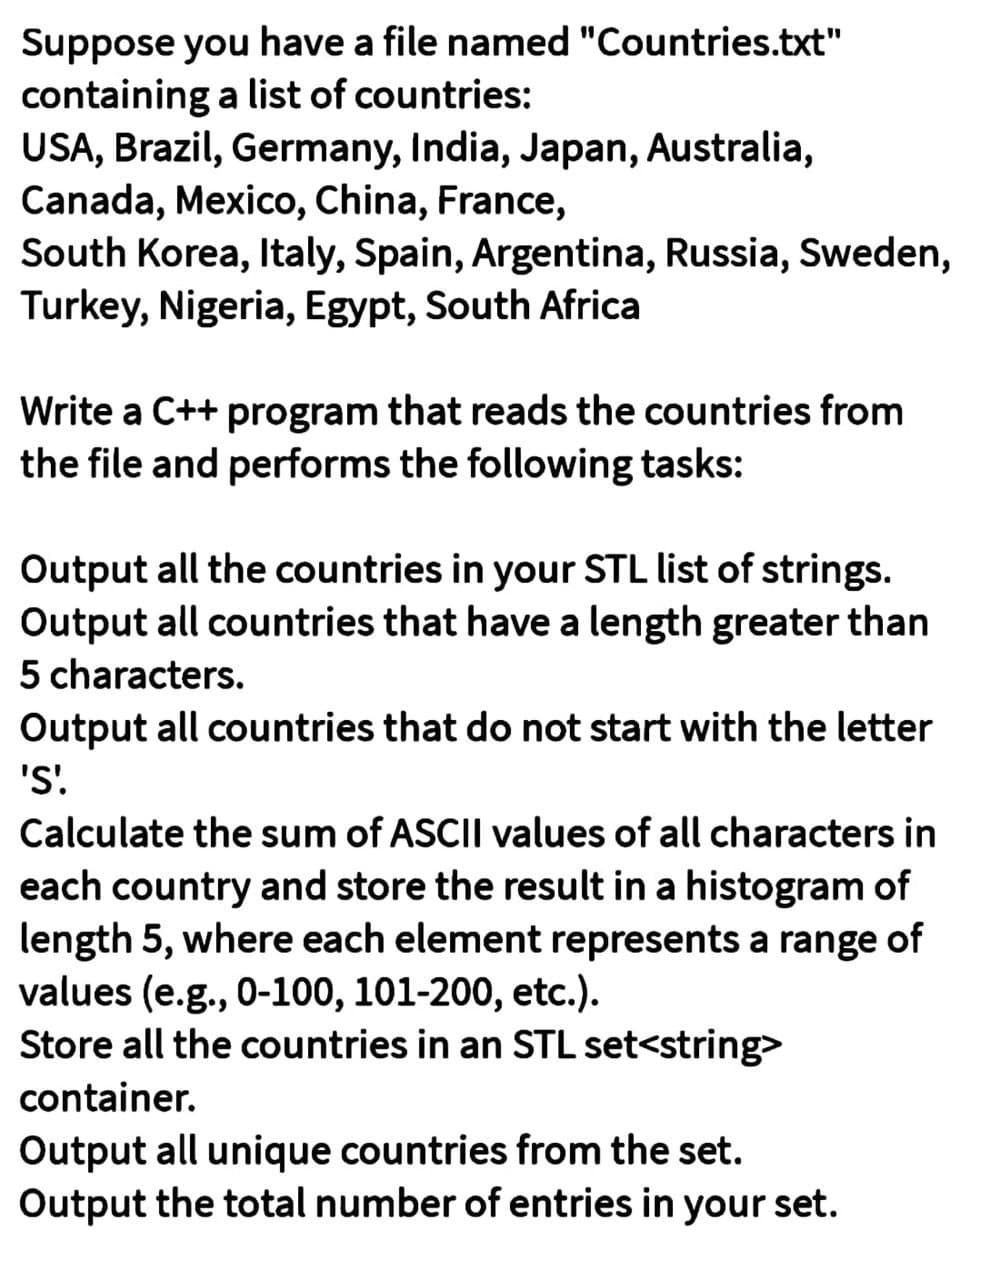 Suppose you have a file named "Countries.txt"
containing a list of countries:
USA, Brazil, Germany, India, Japan, Australia,
Canada, Mexico, China, France,
South Korea,Italy, Spain, Argentina, Russia, Sweden,
Turkey, Nigeria, Egypt, South Africa
Write a C++ program that reads the countries from
the file and performs the following tasks:
Output all the countries in your STL list of strings.
Output all countries that have a length greater than
5 characters.
Output all countries that do not start with the letter
'S'.
Calculate the sum of ASCII values of all characters in
each country and store the result in a histogram of
length 5, where each element represents a range of
values (e.g., 0-100, 101-200, etc.).
Store all the countries in an STL set<string>
container.
Output all unique countries from the set.
Output the total number of entries in your set.